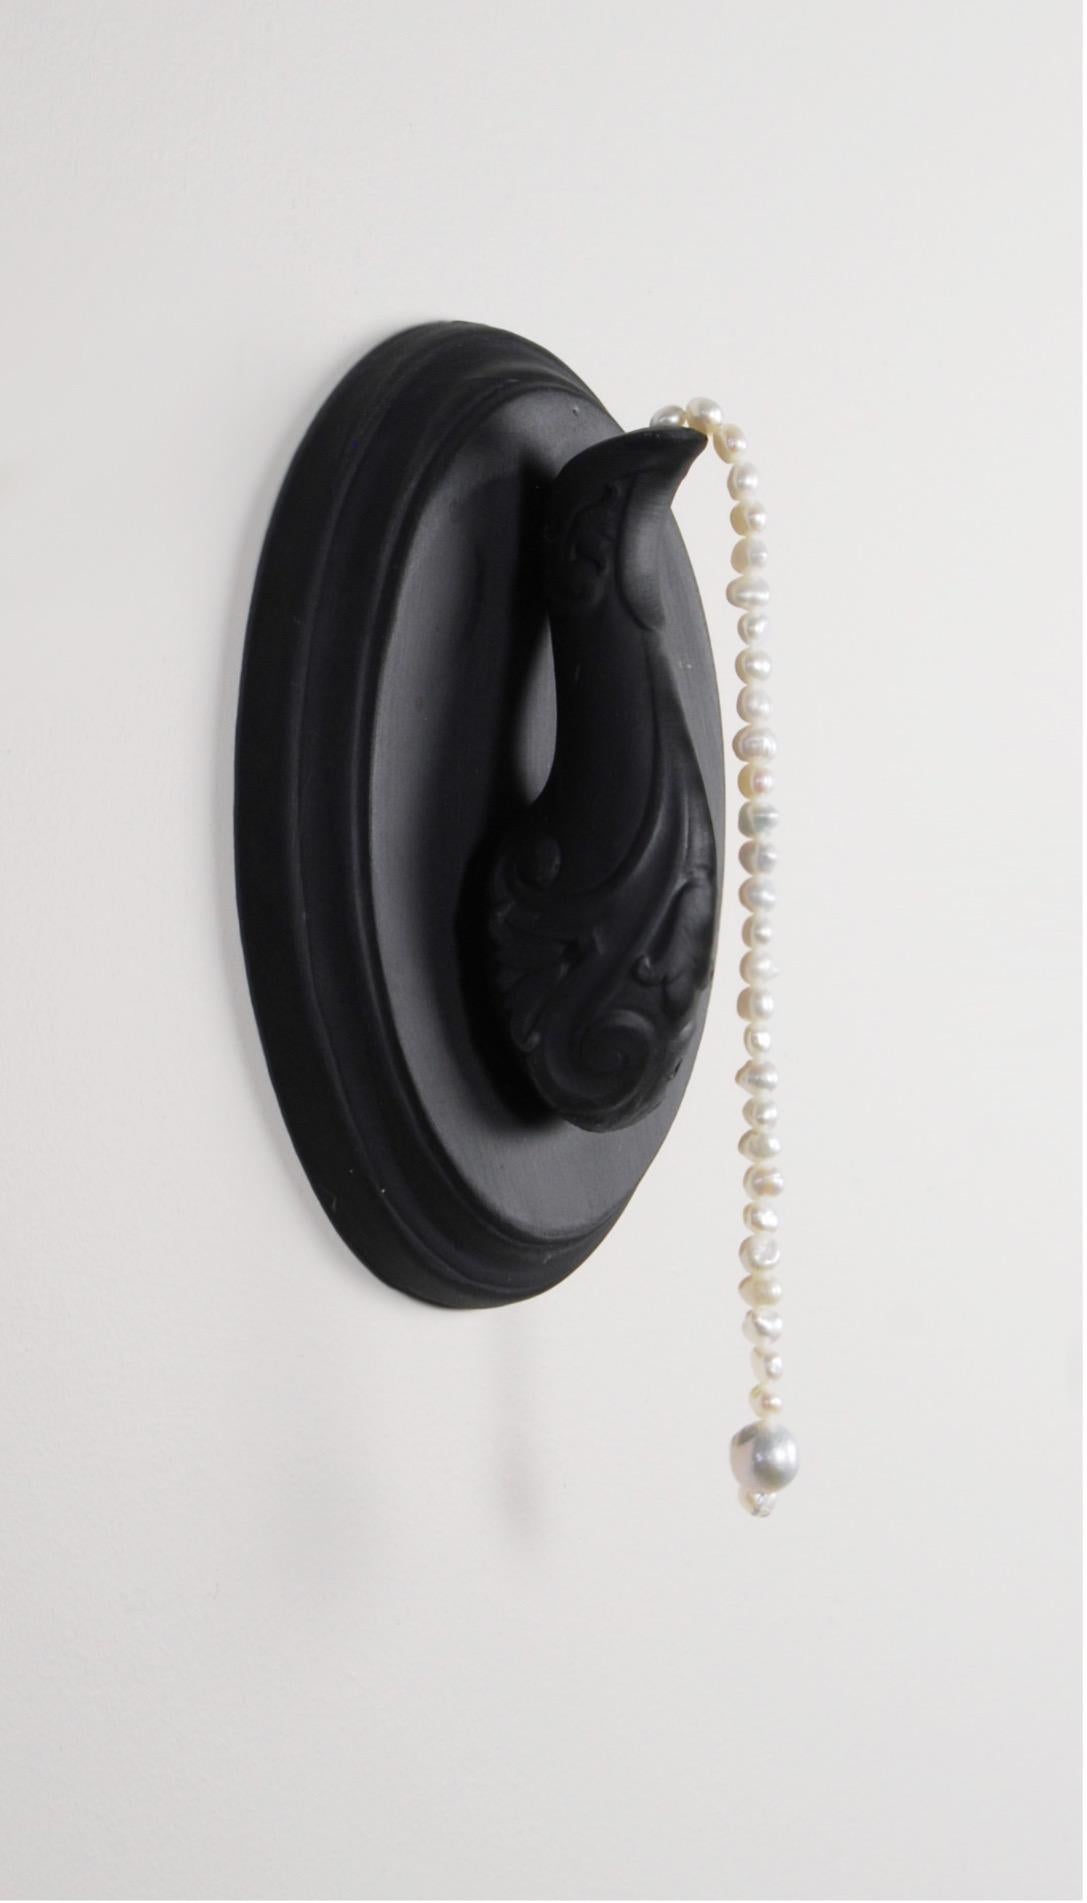 Matt Smith Abstract Sculpture - Aiden (Spout with pearls), 2021, Black Parian, Freshwater pearls